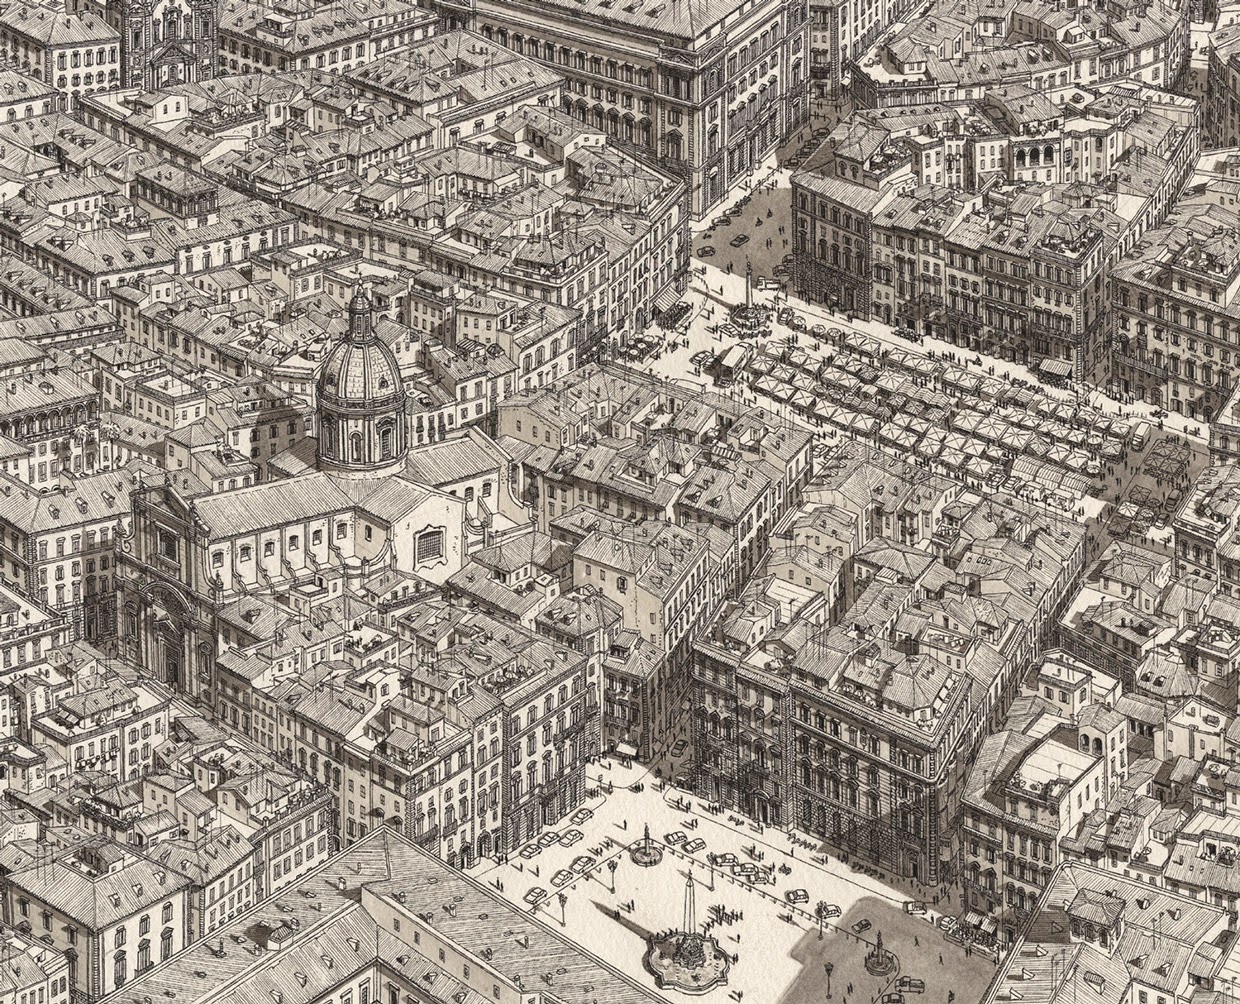 01-Rome-Piazza-Stefan-Bleekrode-Fantasy-in-Detailed-Architectural-Drawings-www-designstack-co